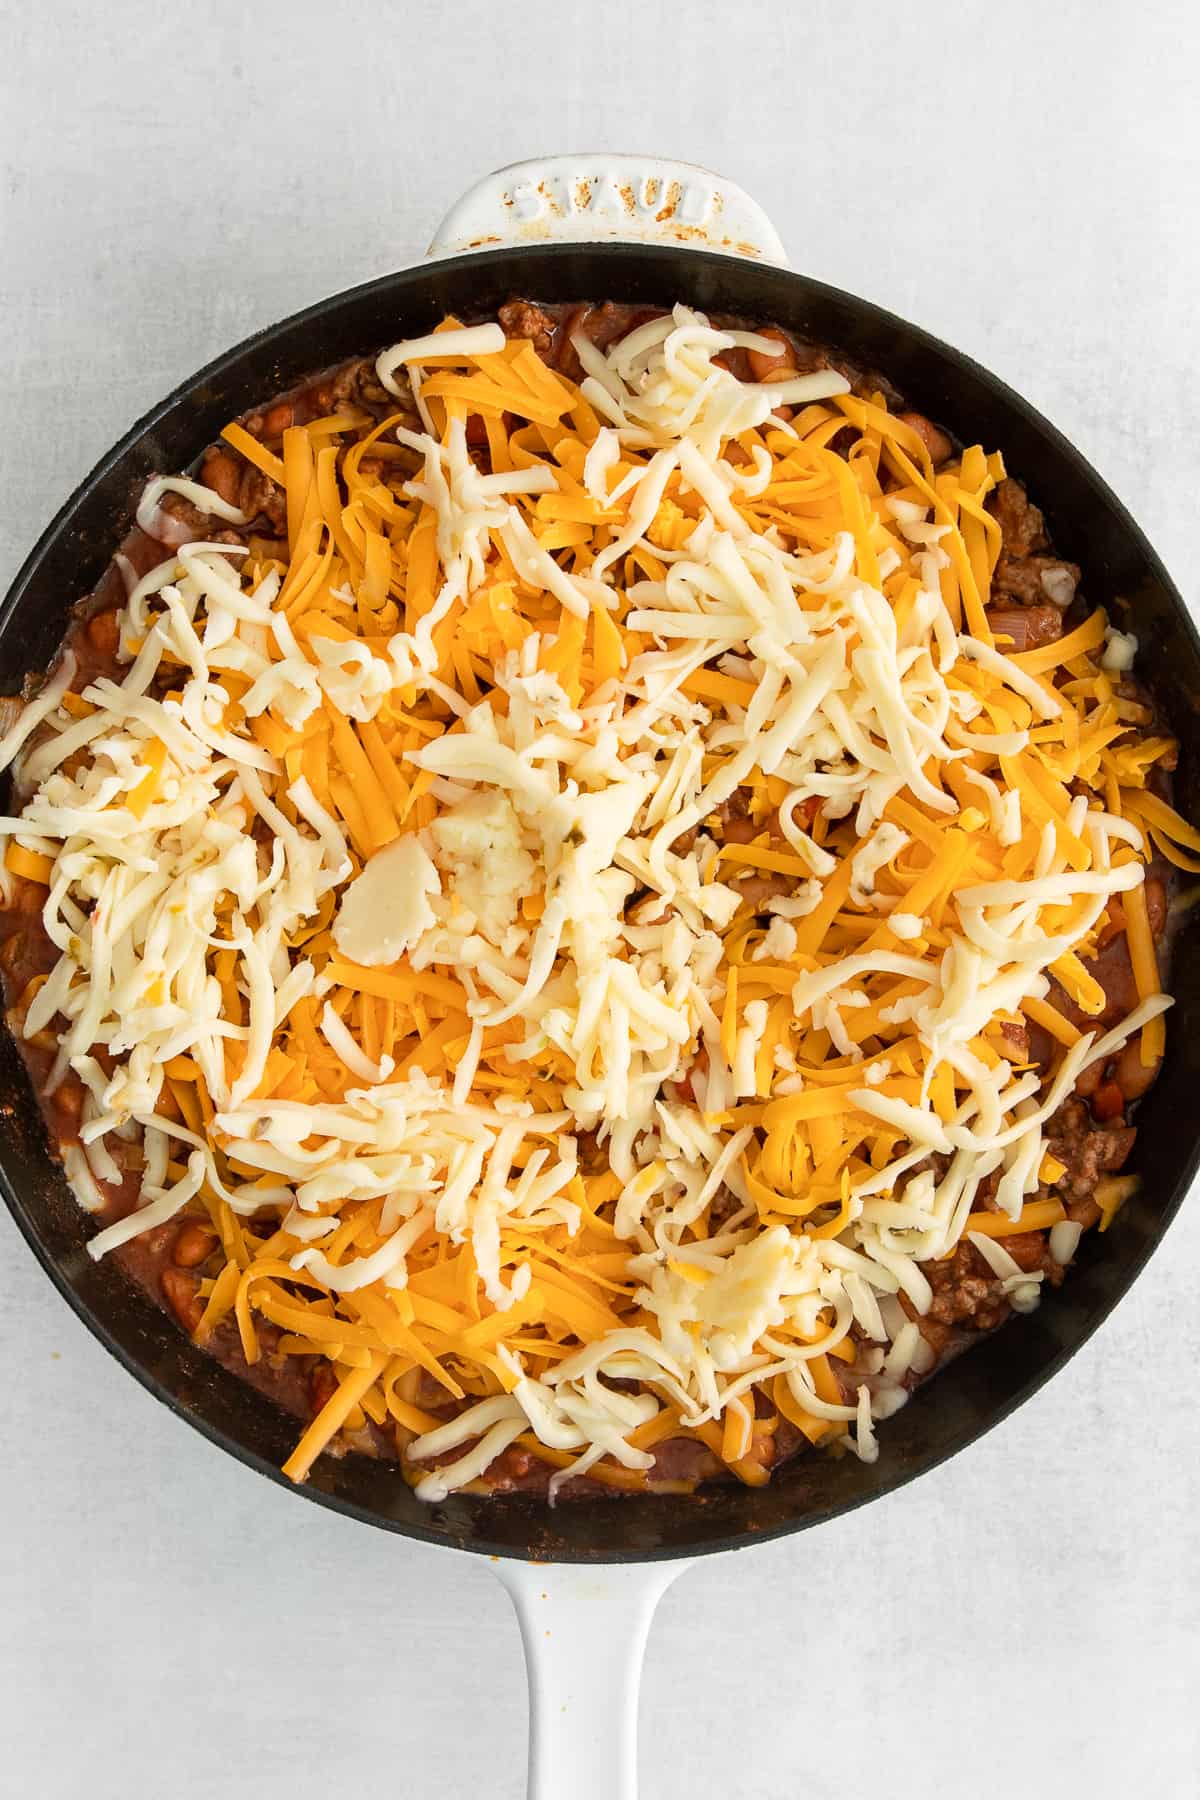 Cheesy frito taco skillet topped with shredded cheese.